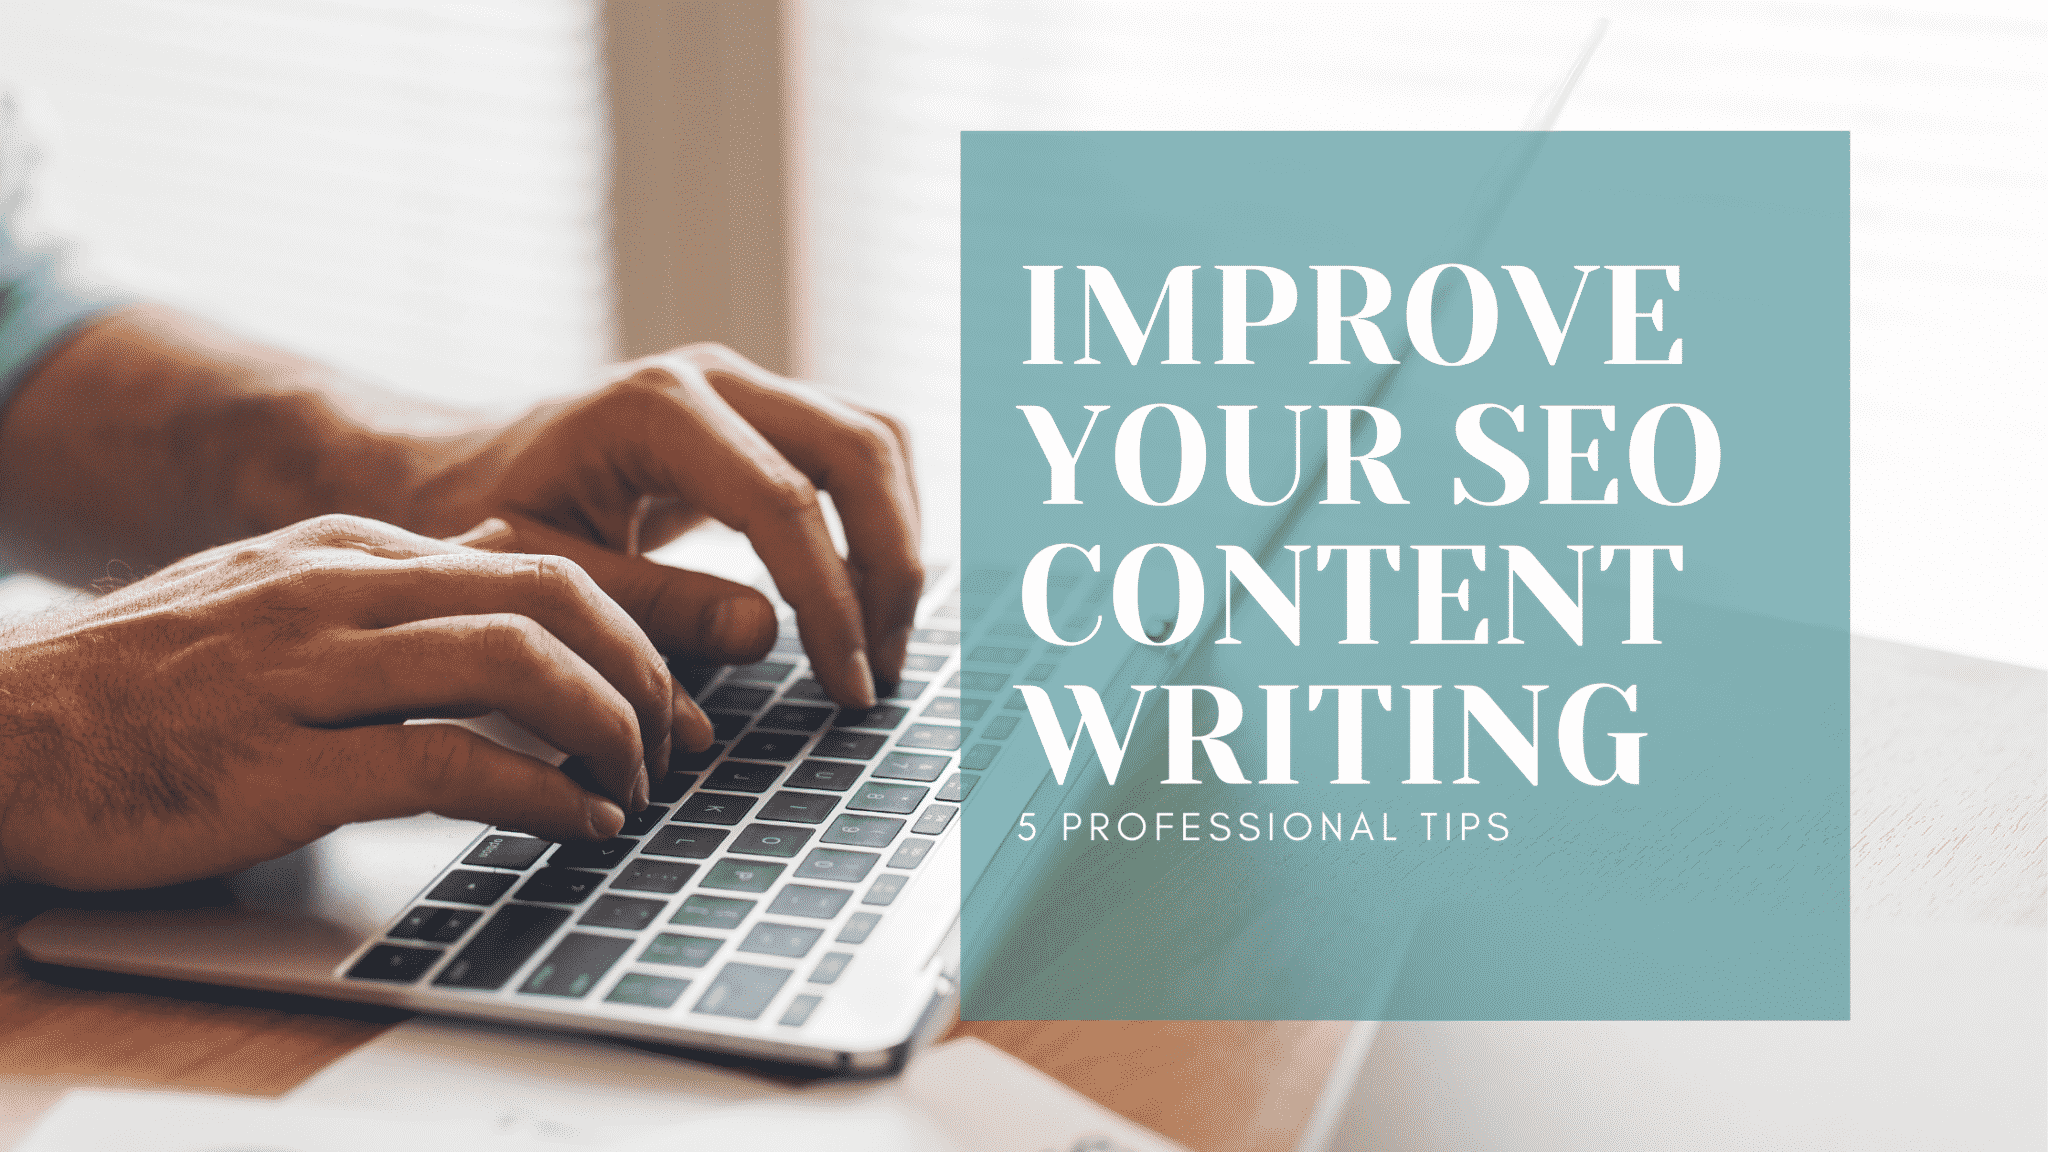 Featured image for “5 Tips for Improving Your SEO Content Writing”